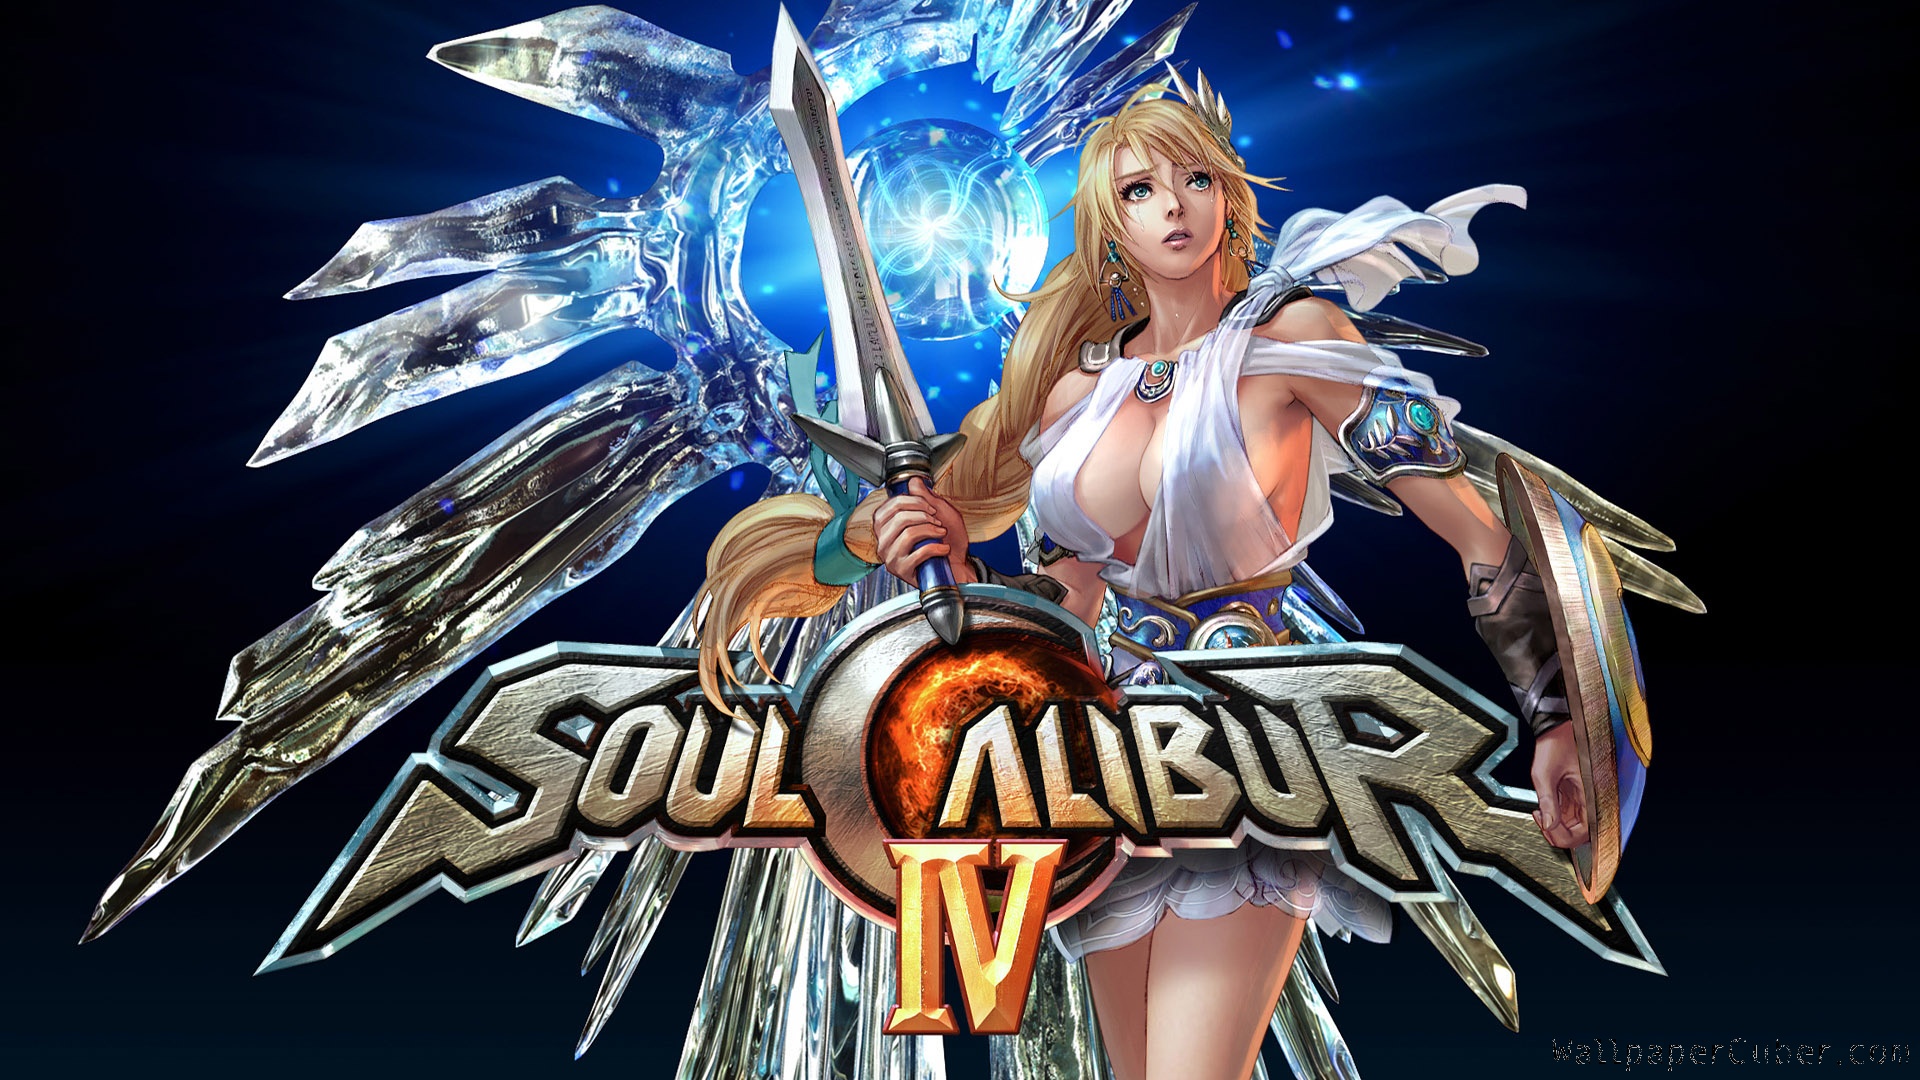 soulcalibur iv failed to connect